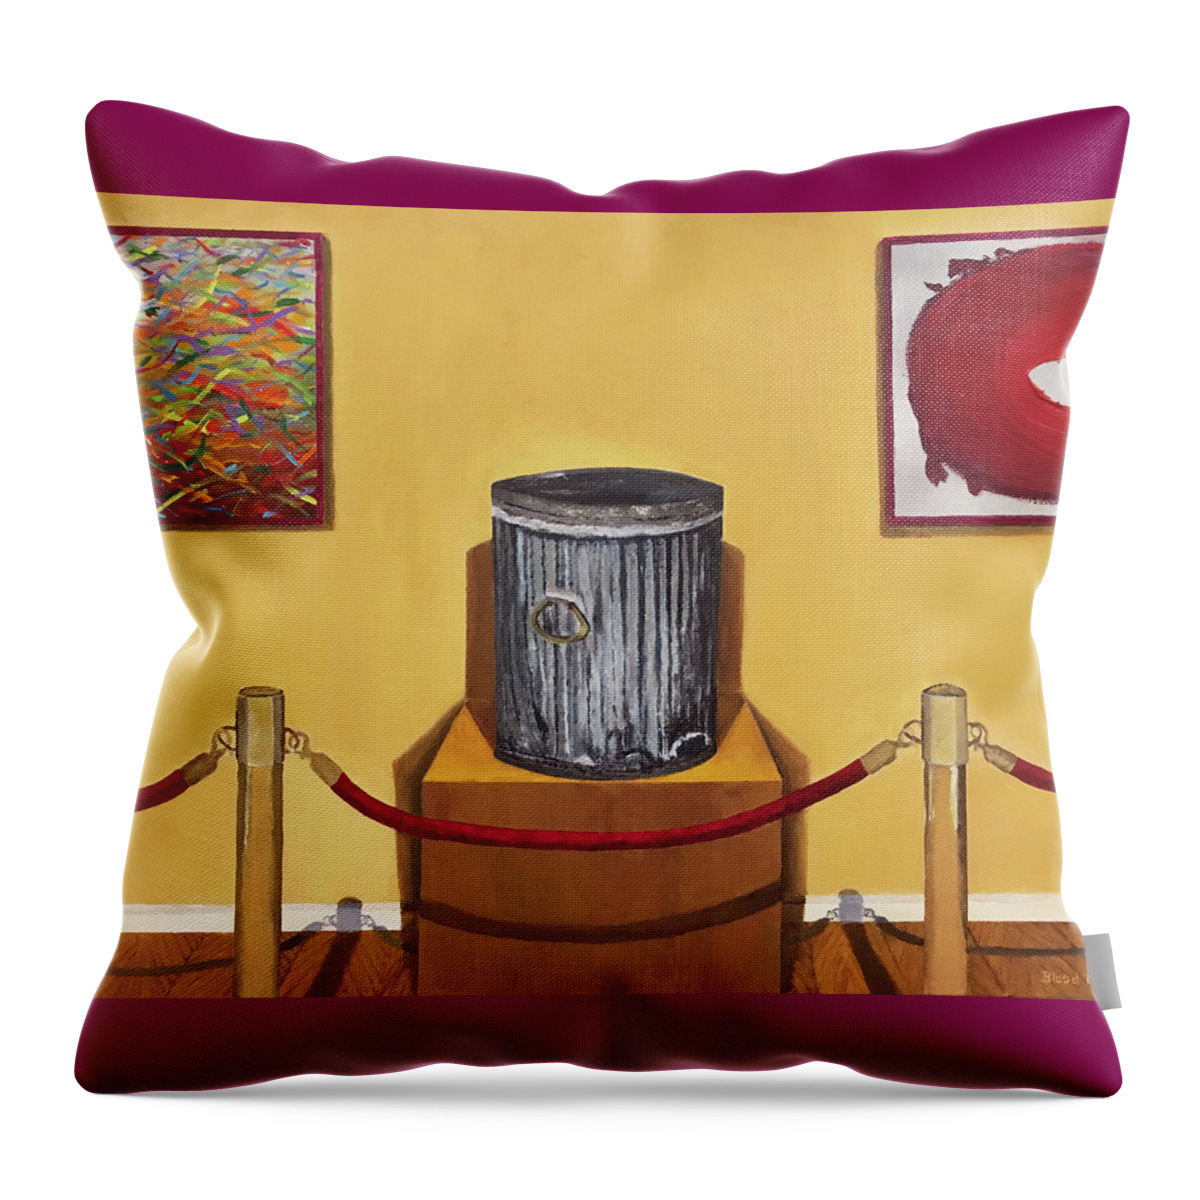 Modern Art Throw Pillow featuring the painting Modern Art by Thomas Blood